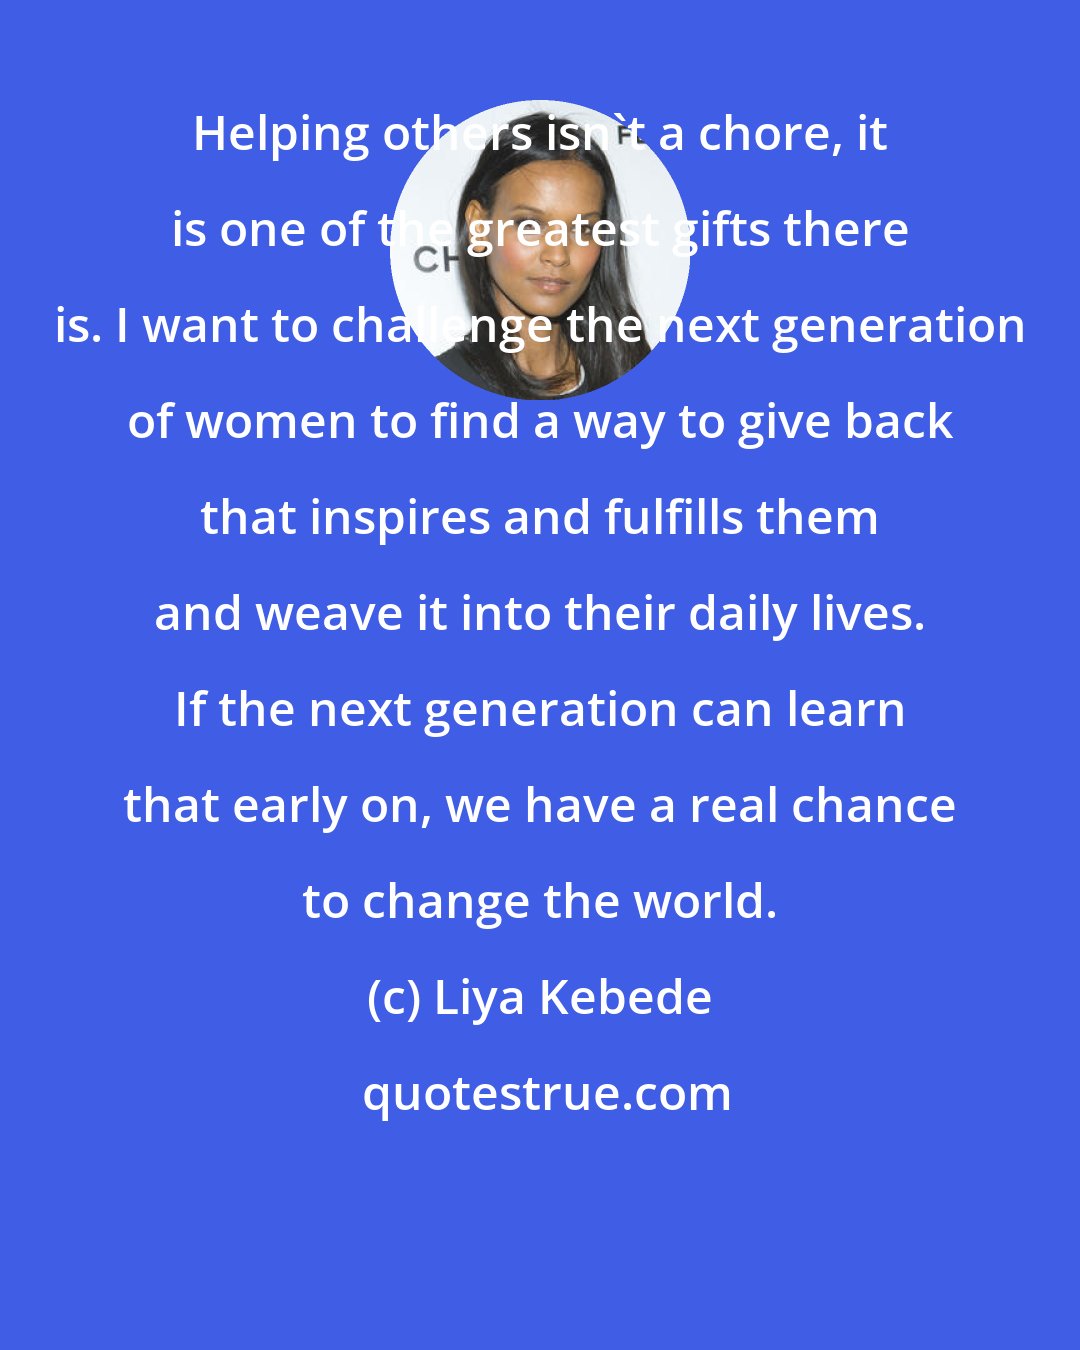 Liya Kebede: Helping others isn't a chore, it is one of the greatest gifts there is. I want to challenge the next generation of women to find a way to give back that inspires and fulfills them and weave it into their daily lives. If the next generation can learn that early on, we have a real chance to change the world.